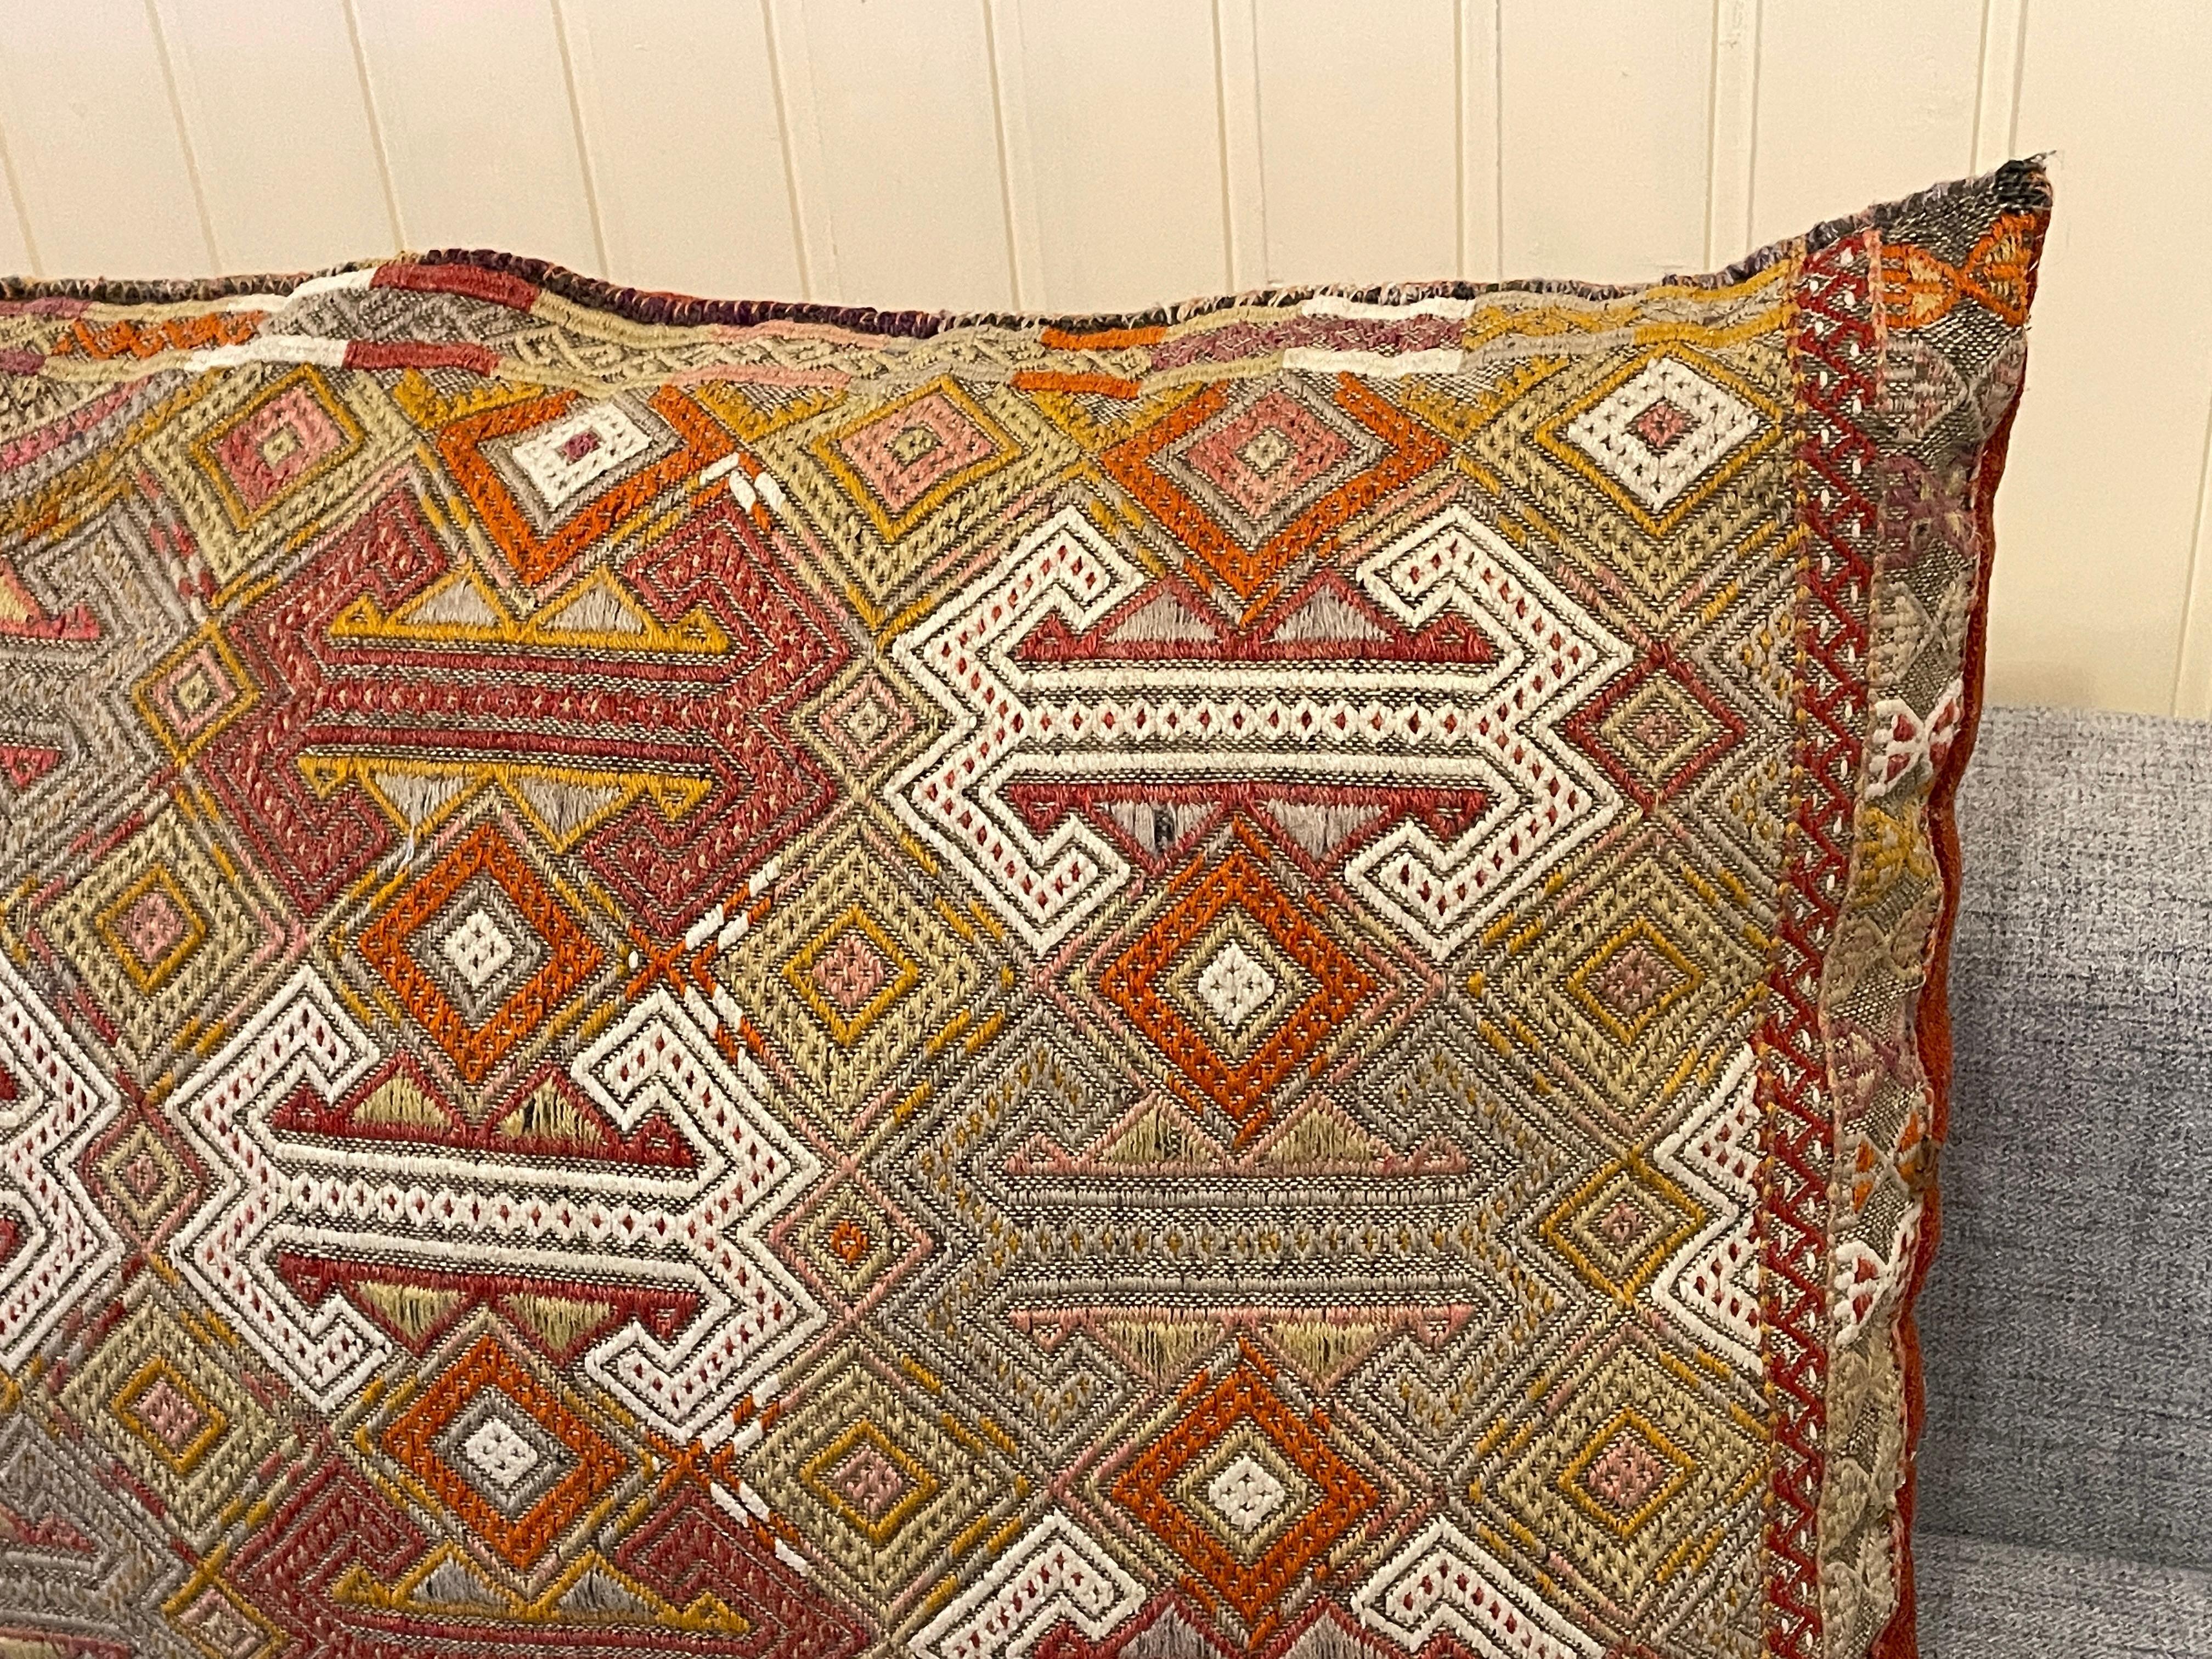 Mid-20th Century Stunning Large Gypsy Turkish Oriental Salt Bag or Rug Embroidery Pillow For Sale